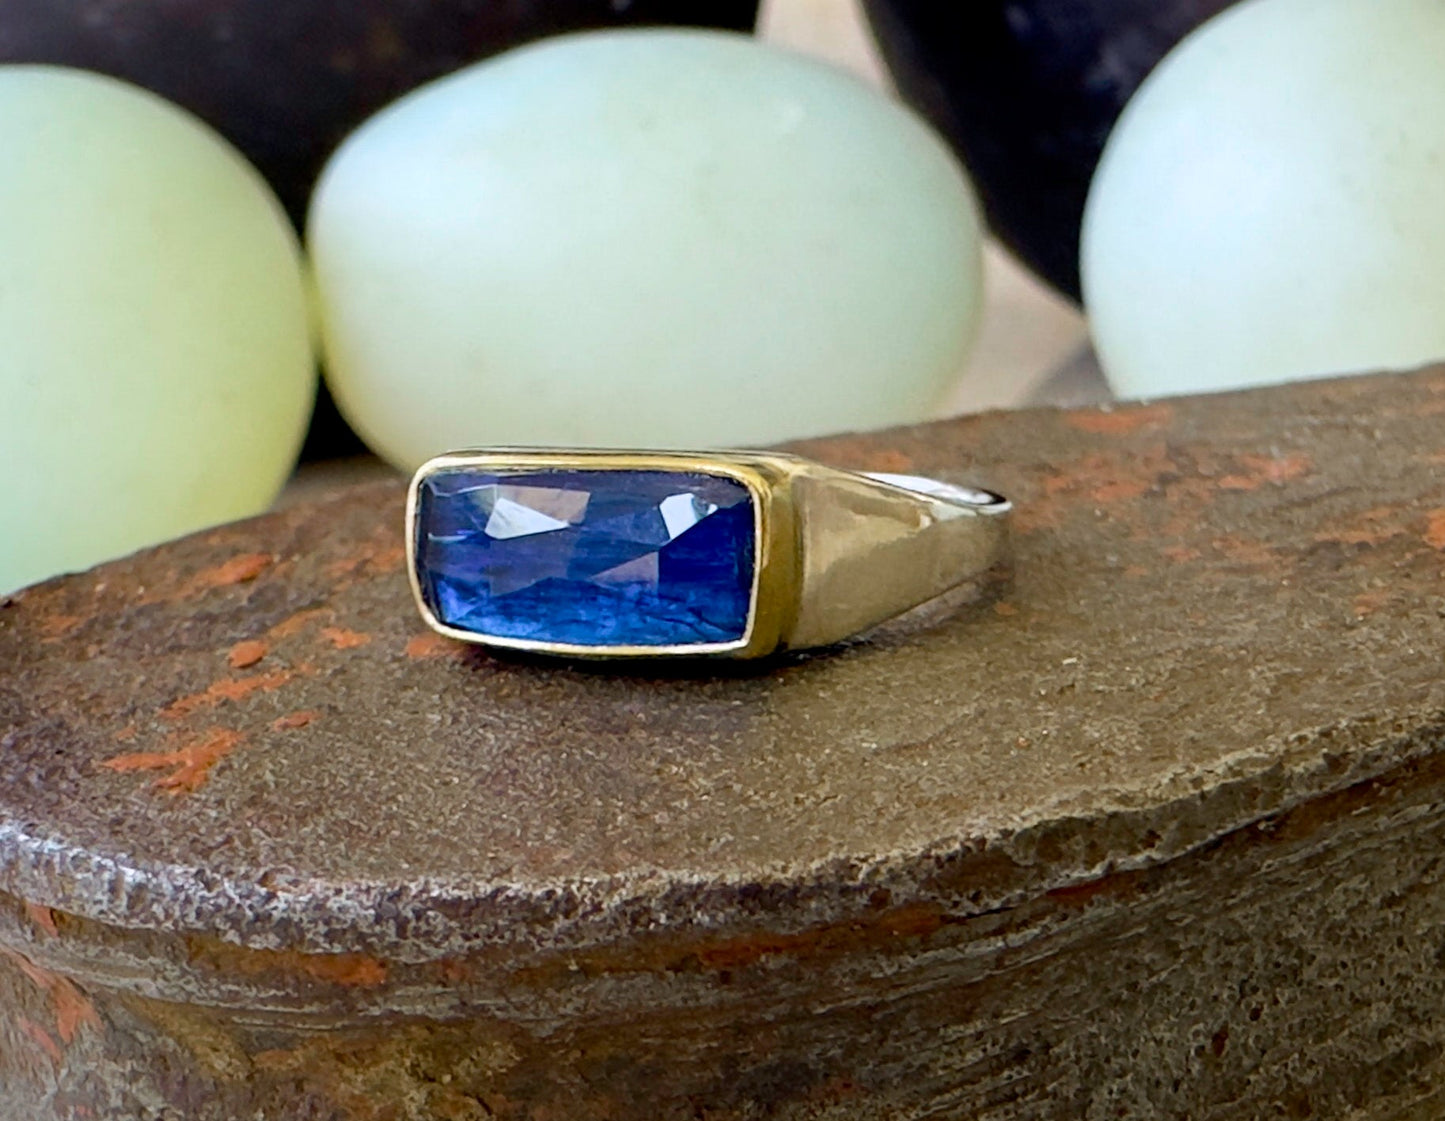 Royal Blue Kyanite Signet Ring With 18k Gold Setting - Bluecave Jewelry